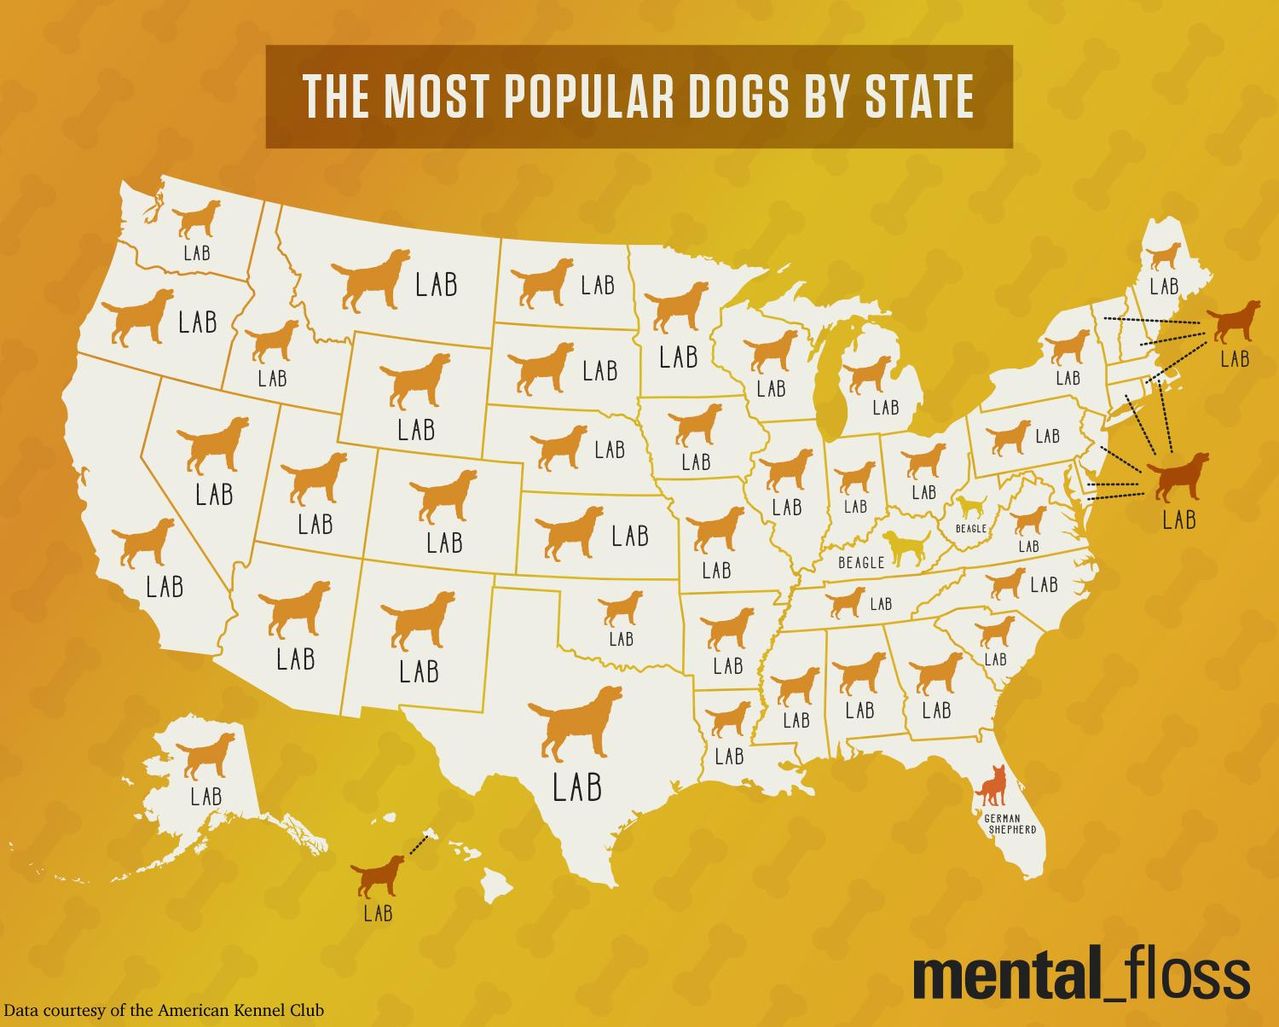 most popular dog by state - The Most Popular Dogs By State B Lab Lab Lab Lab Lab Lab Lab Lab Lar Lab Lab Lab B Lab Ib Lab Lab Lab Beagle Lab Lab Lab Beagle Lab Lab Lab Lab Lab Lab Lab Lab Lab 101 German Shepherd Lab mental floss Data courtesy of the Ameri